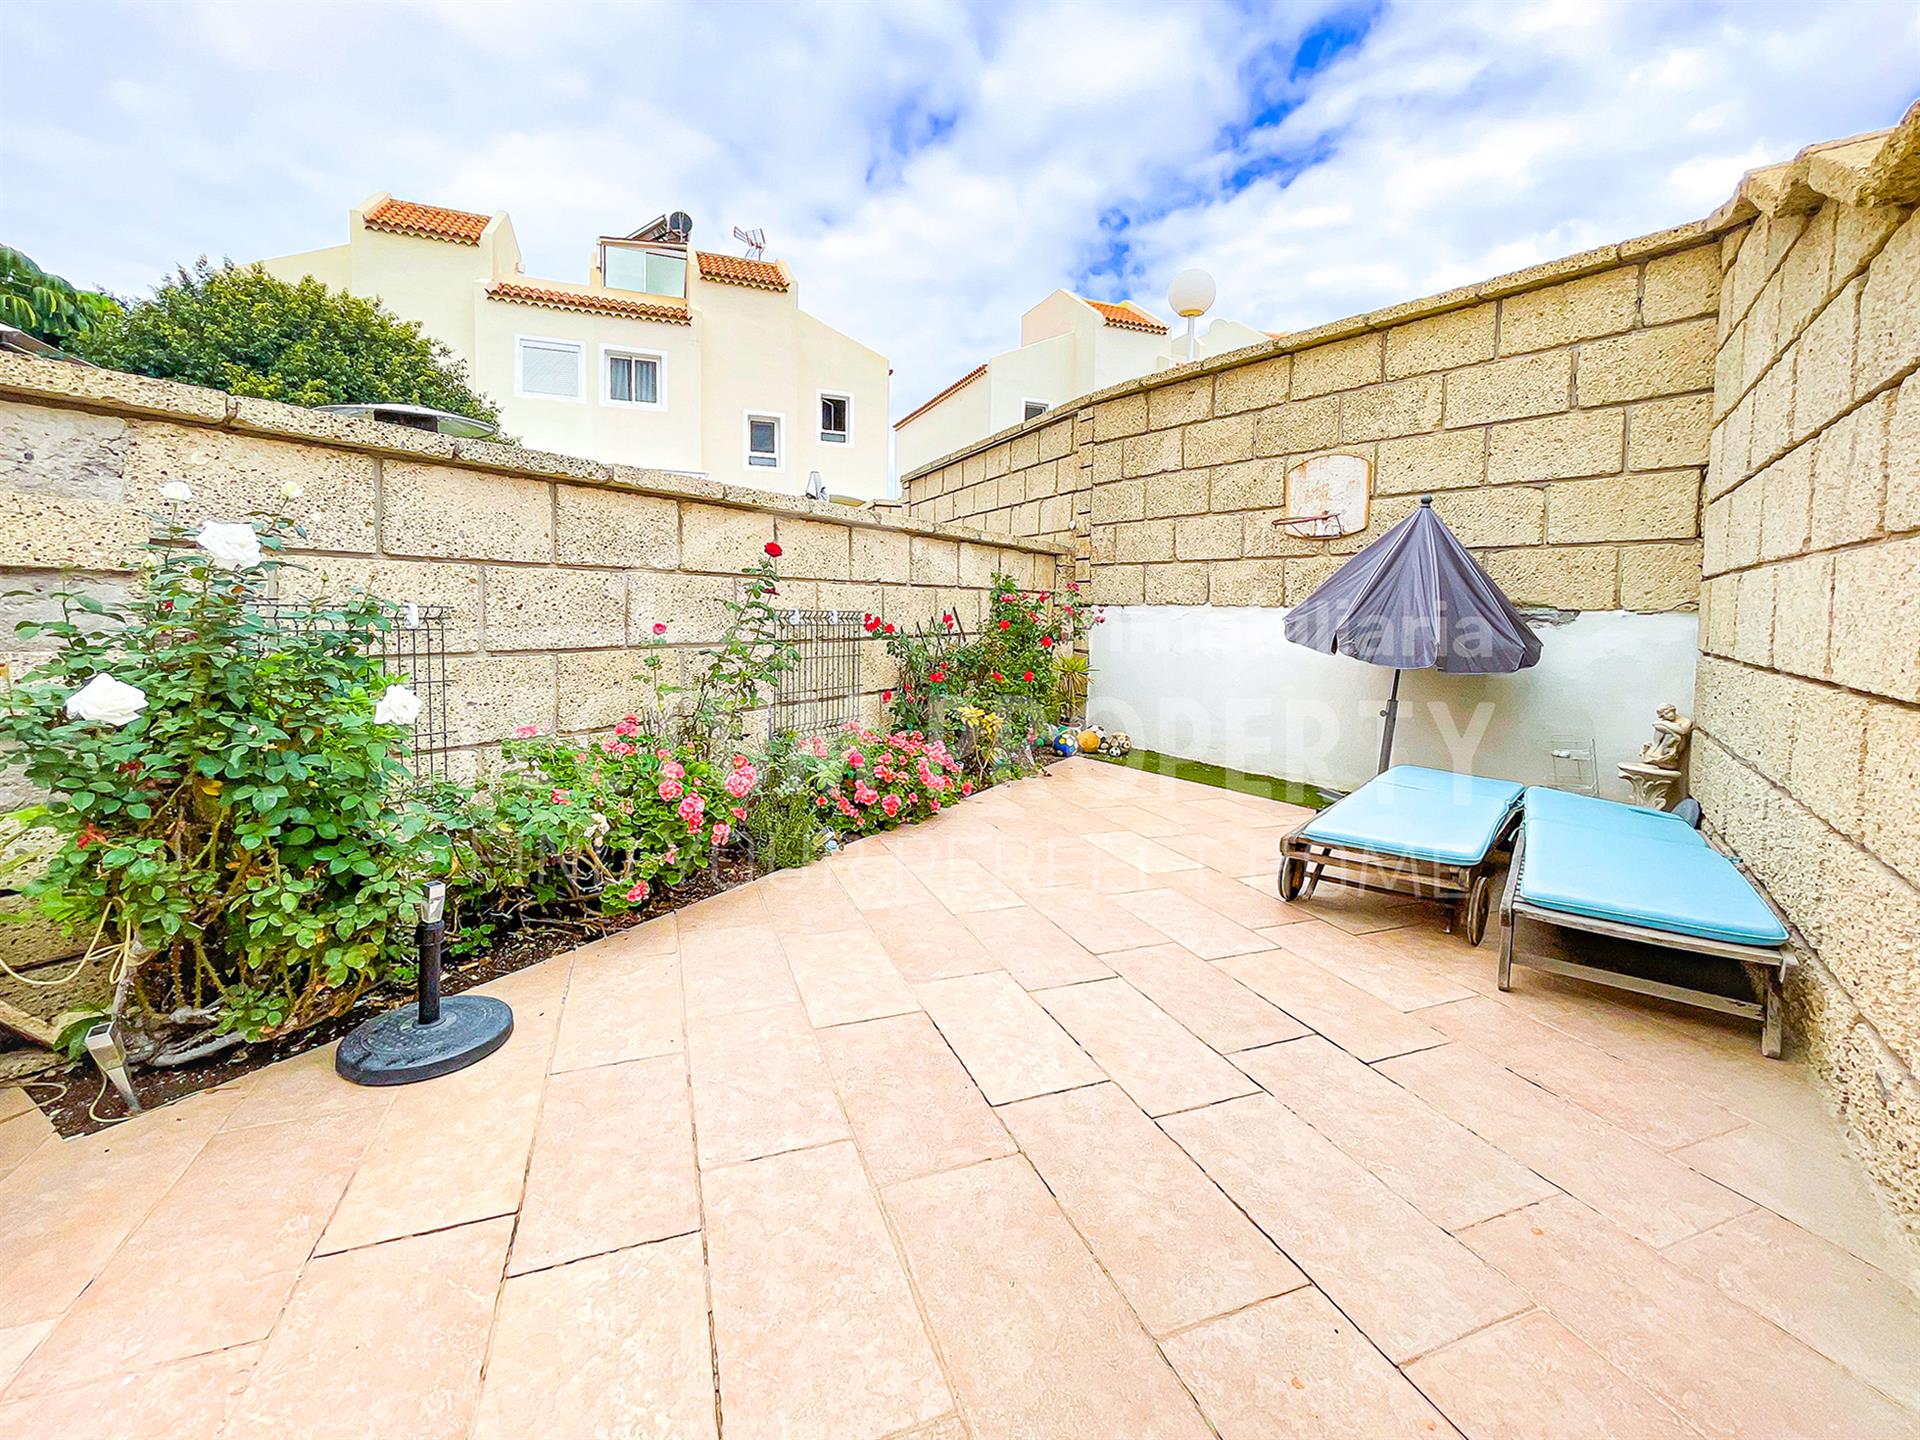 Spacious and cozy townhouse in Madroñal